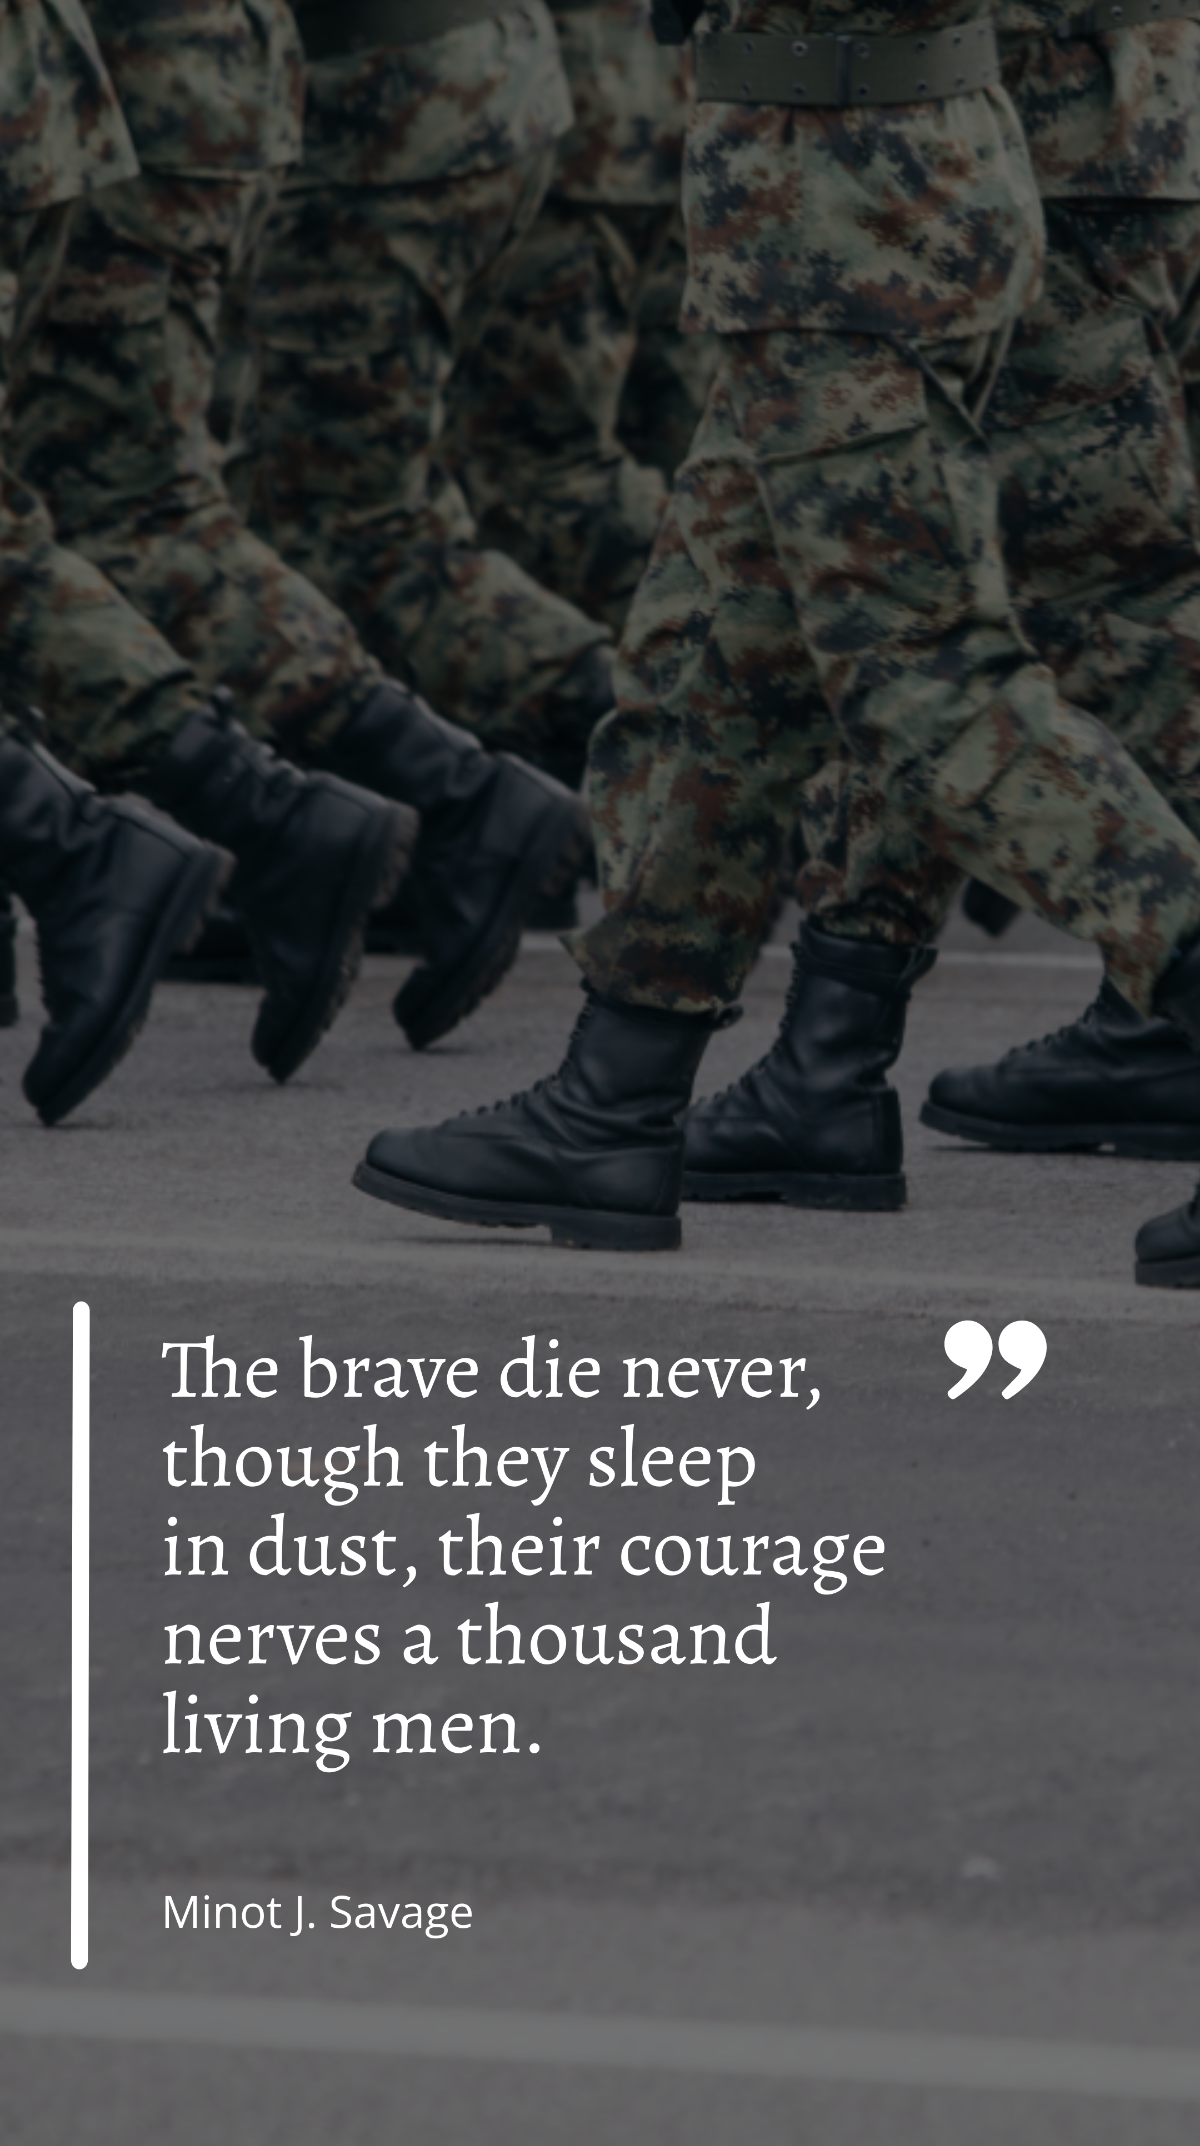 Minot J. Savage - ”The brave die never, though they sleep in dust, their courage nerves a thousand living men.” Template